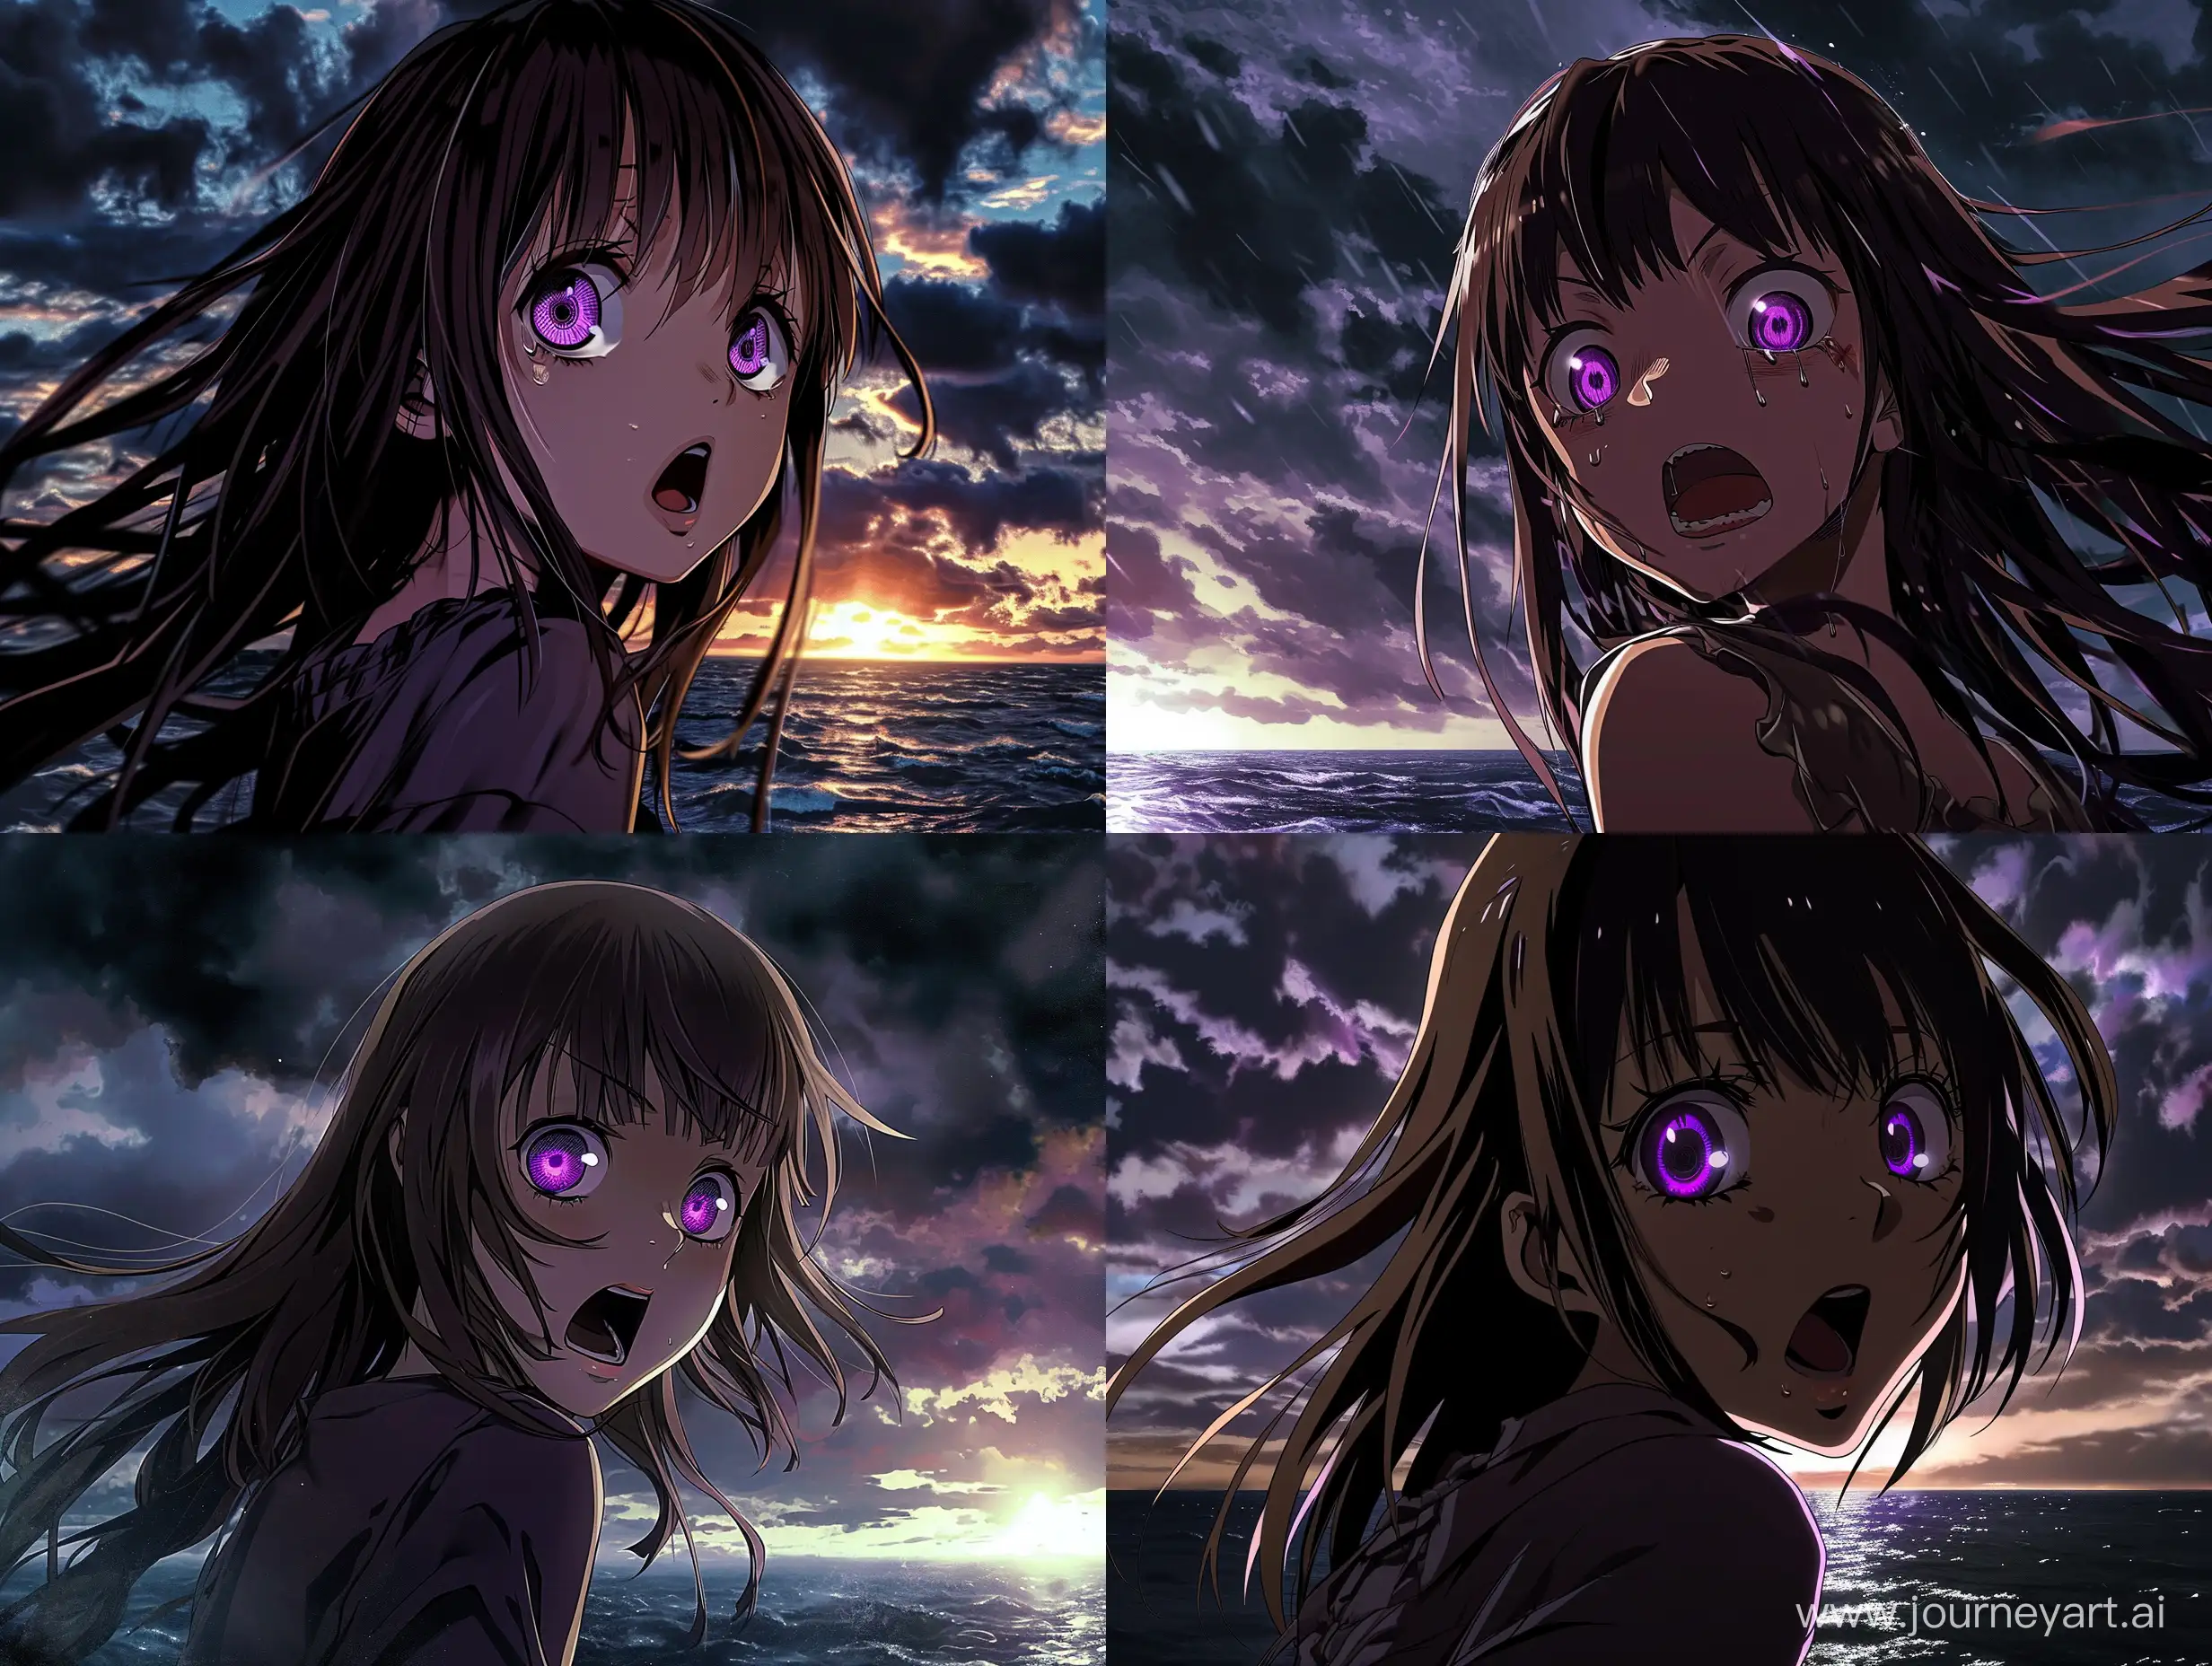 Expressive-MangaStyle-Girl-Against-Dark-and-Purple-Sky